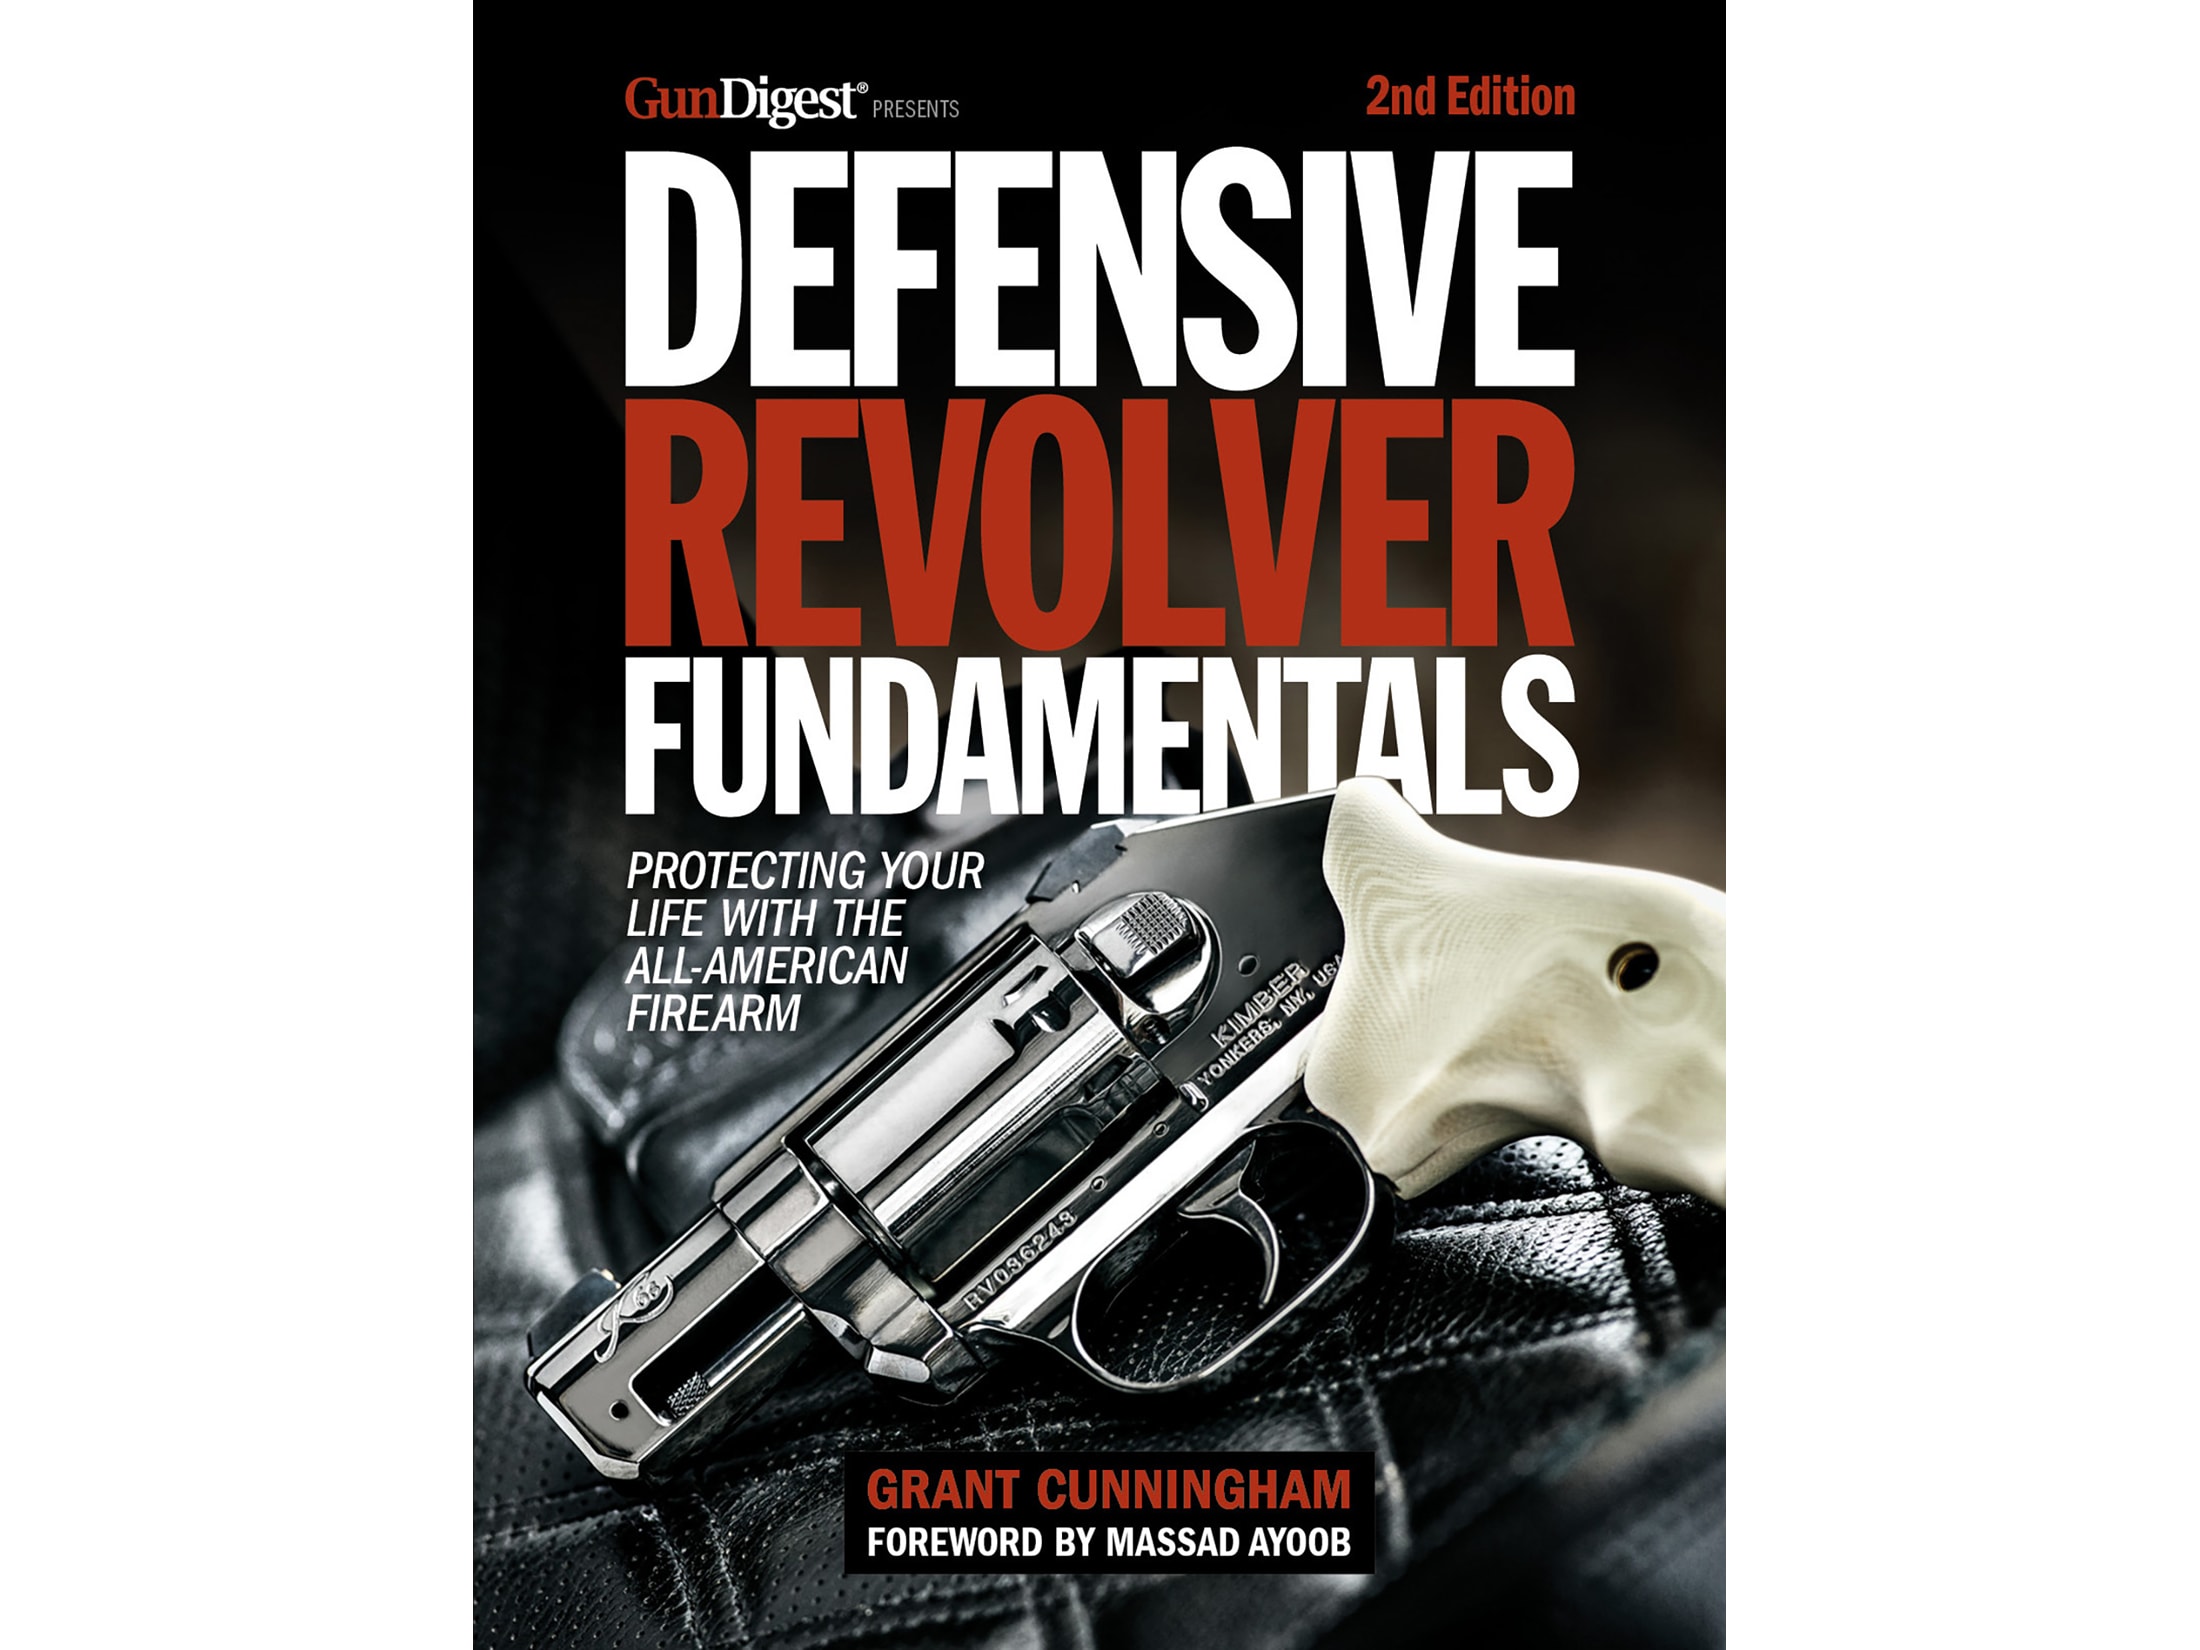 Defensive Revolver Fundamentals, 2nd Edition by Grant Cunningham